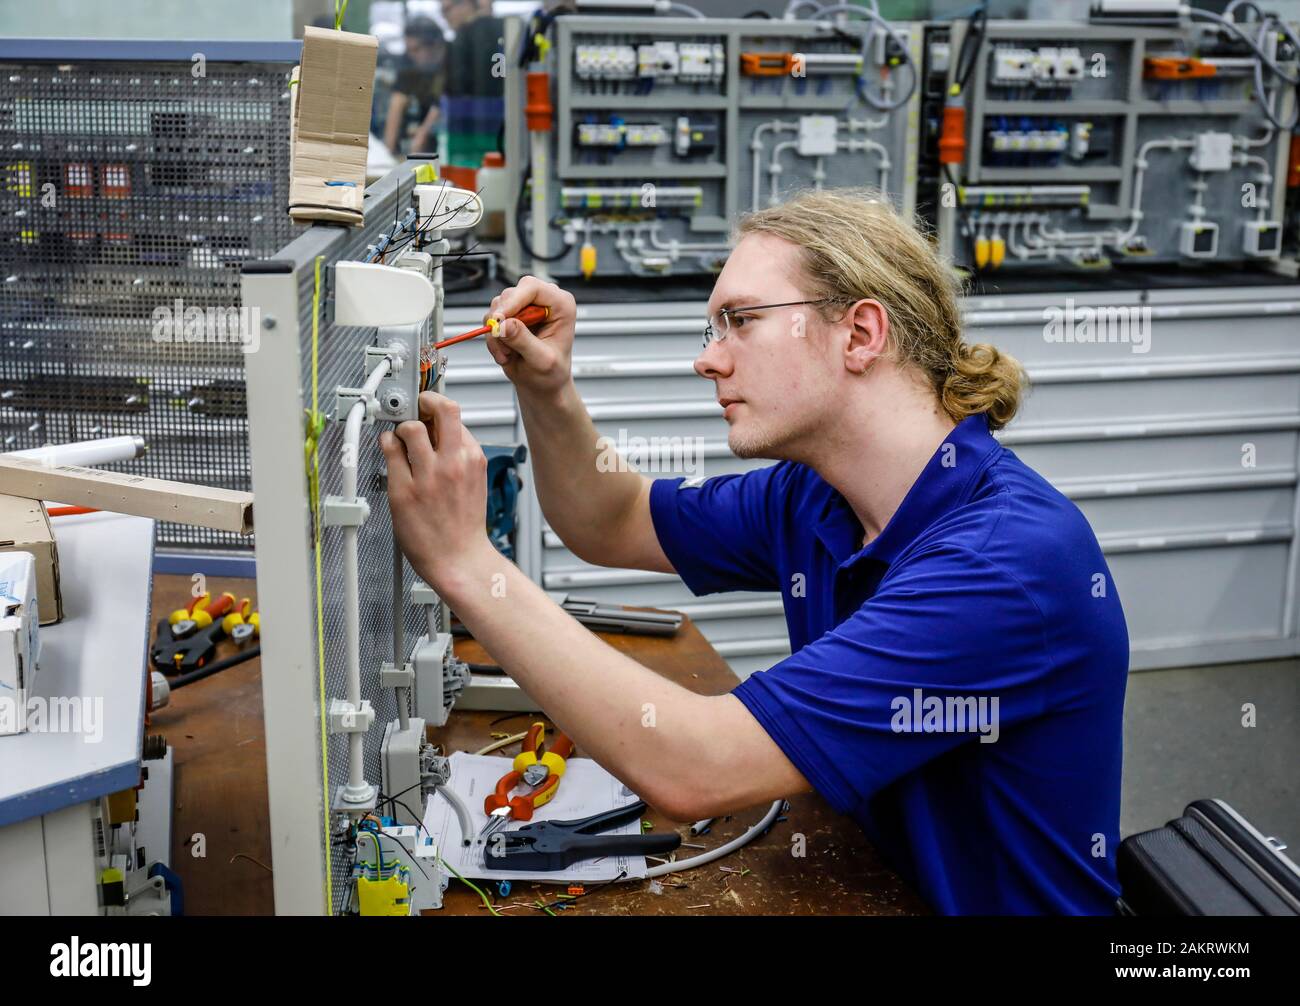 Remscheid, North Rhine-Westphalia, Germany - apprentices in electrical professions here at the basic training, vocational training centre of the Remsc Stock Photo